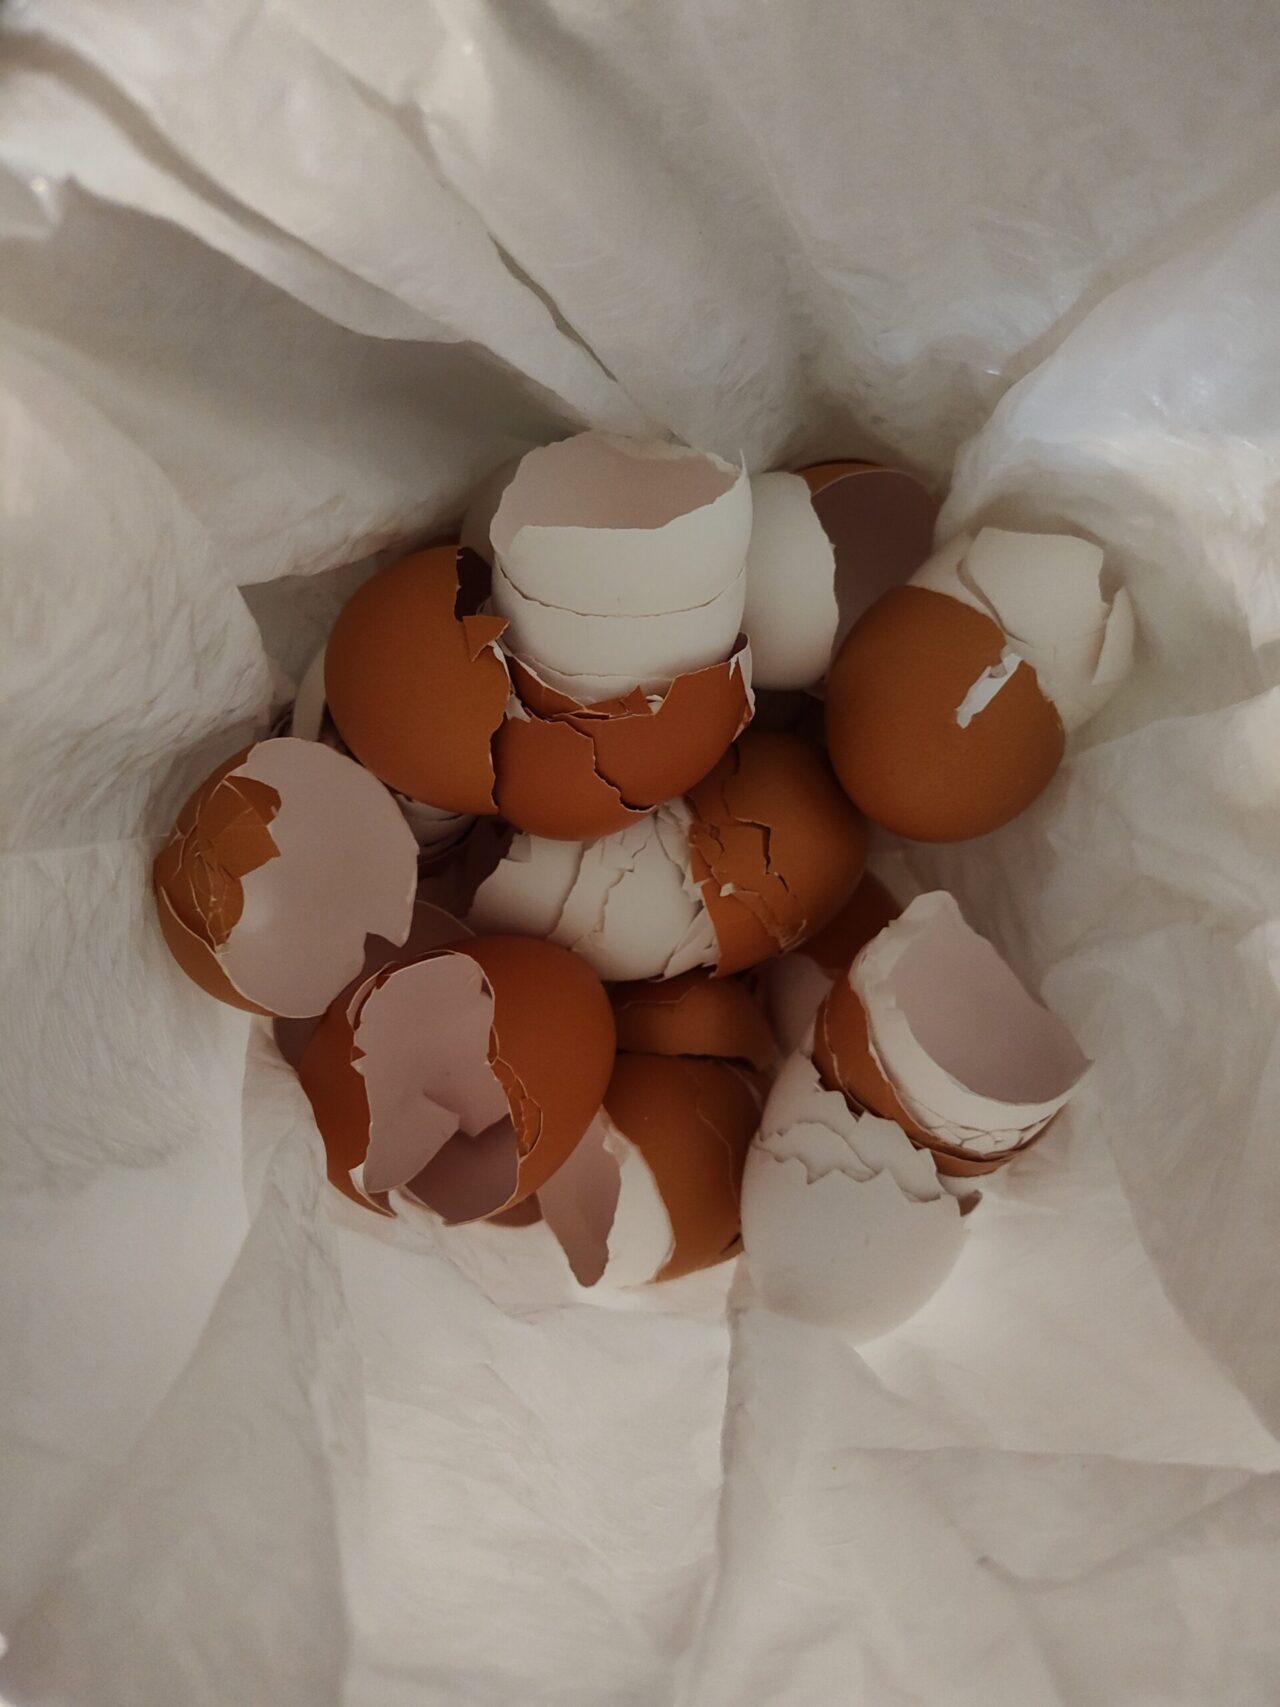 Manufacturers Use Eggshells in Food and Beverage Products